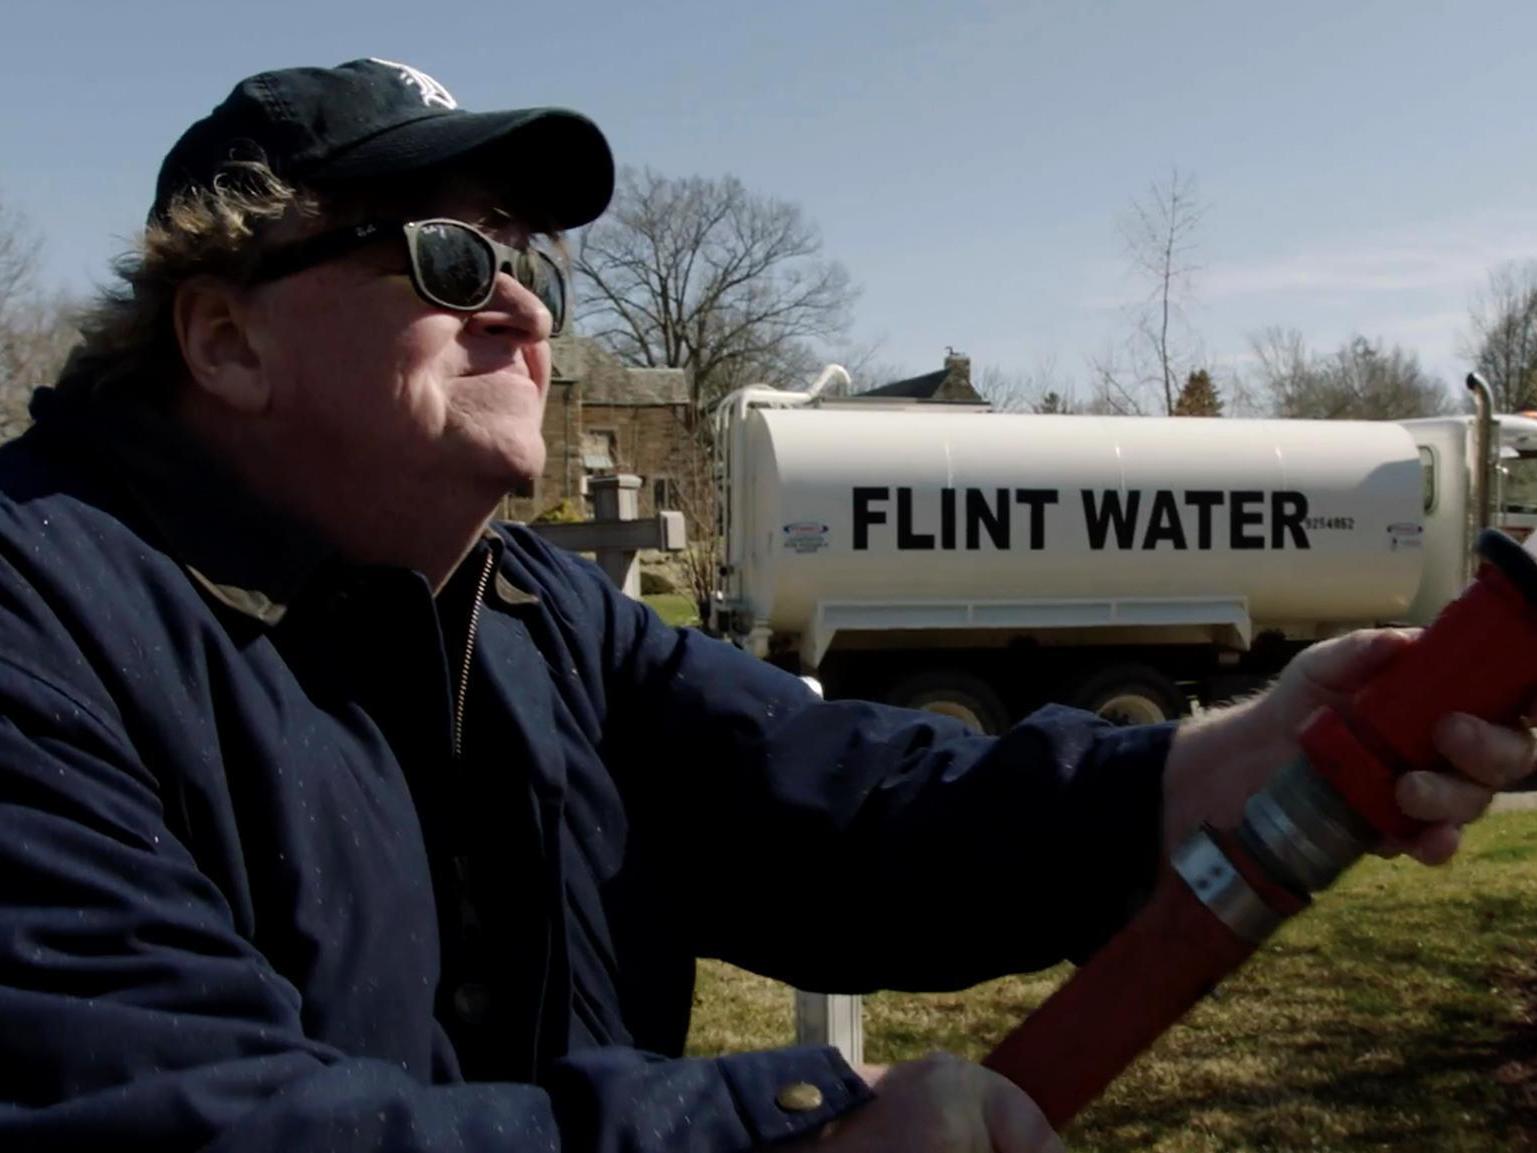 The new documentary looks into the poisoning of the water supply in Moore’s hometown Flint in 2014